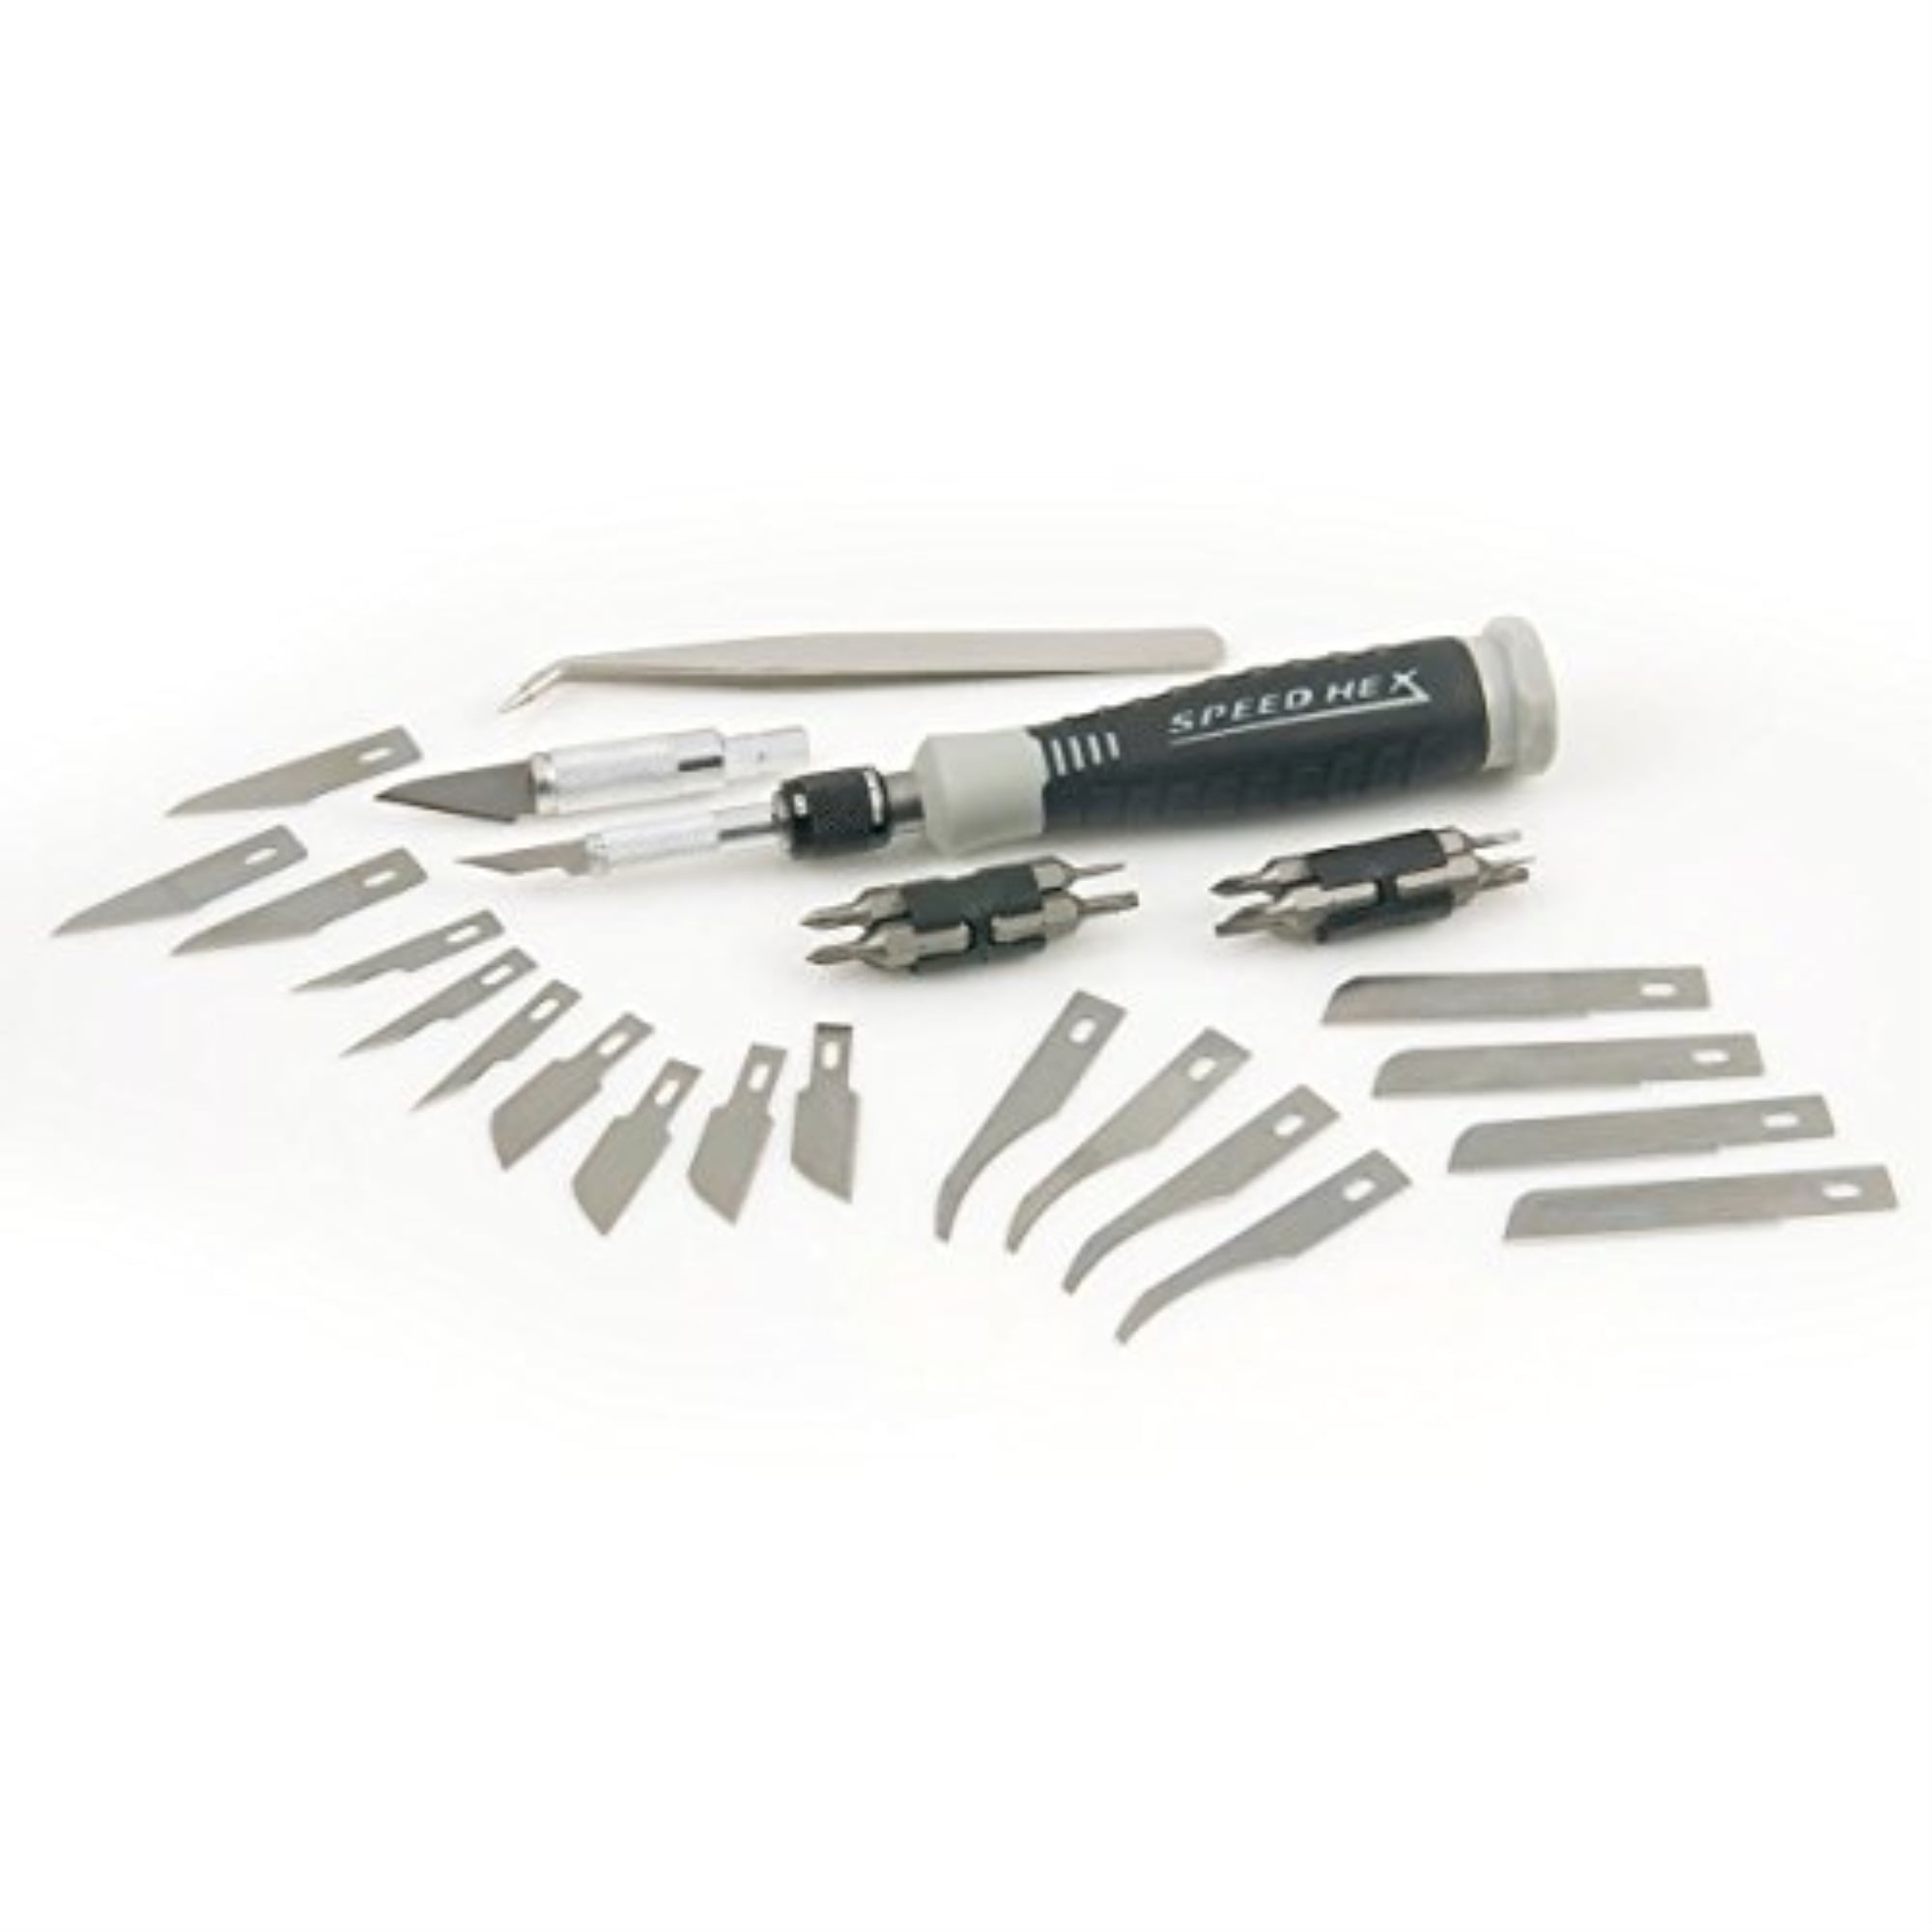 Picture of Pell Industrial 2492221 Micro Screwdriver & Precision Knife Set, 36 Piece